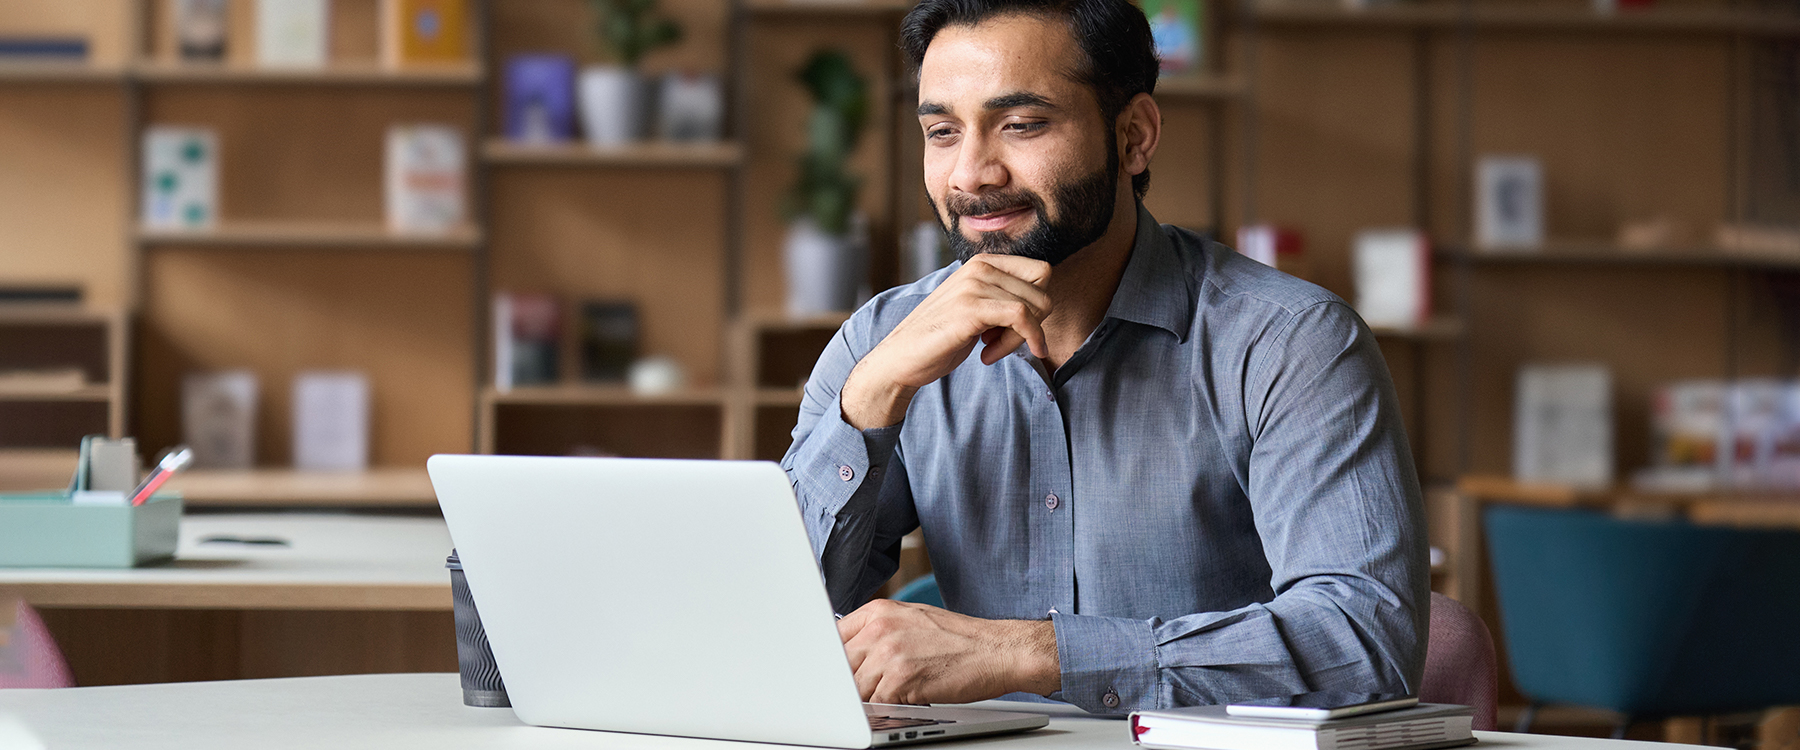 Man with beard and button up smiling at laptop in office